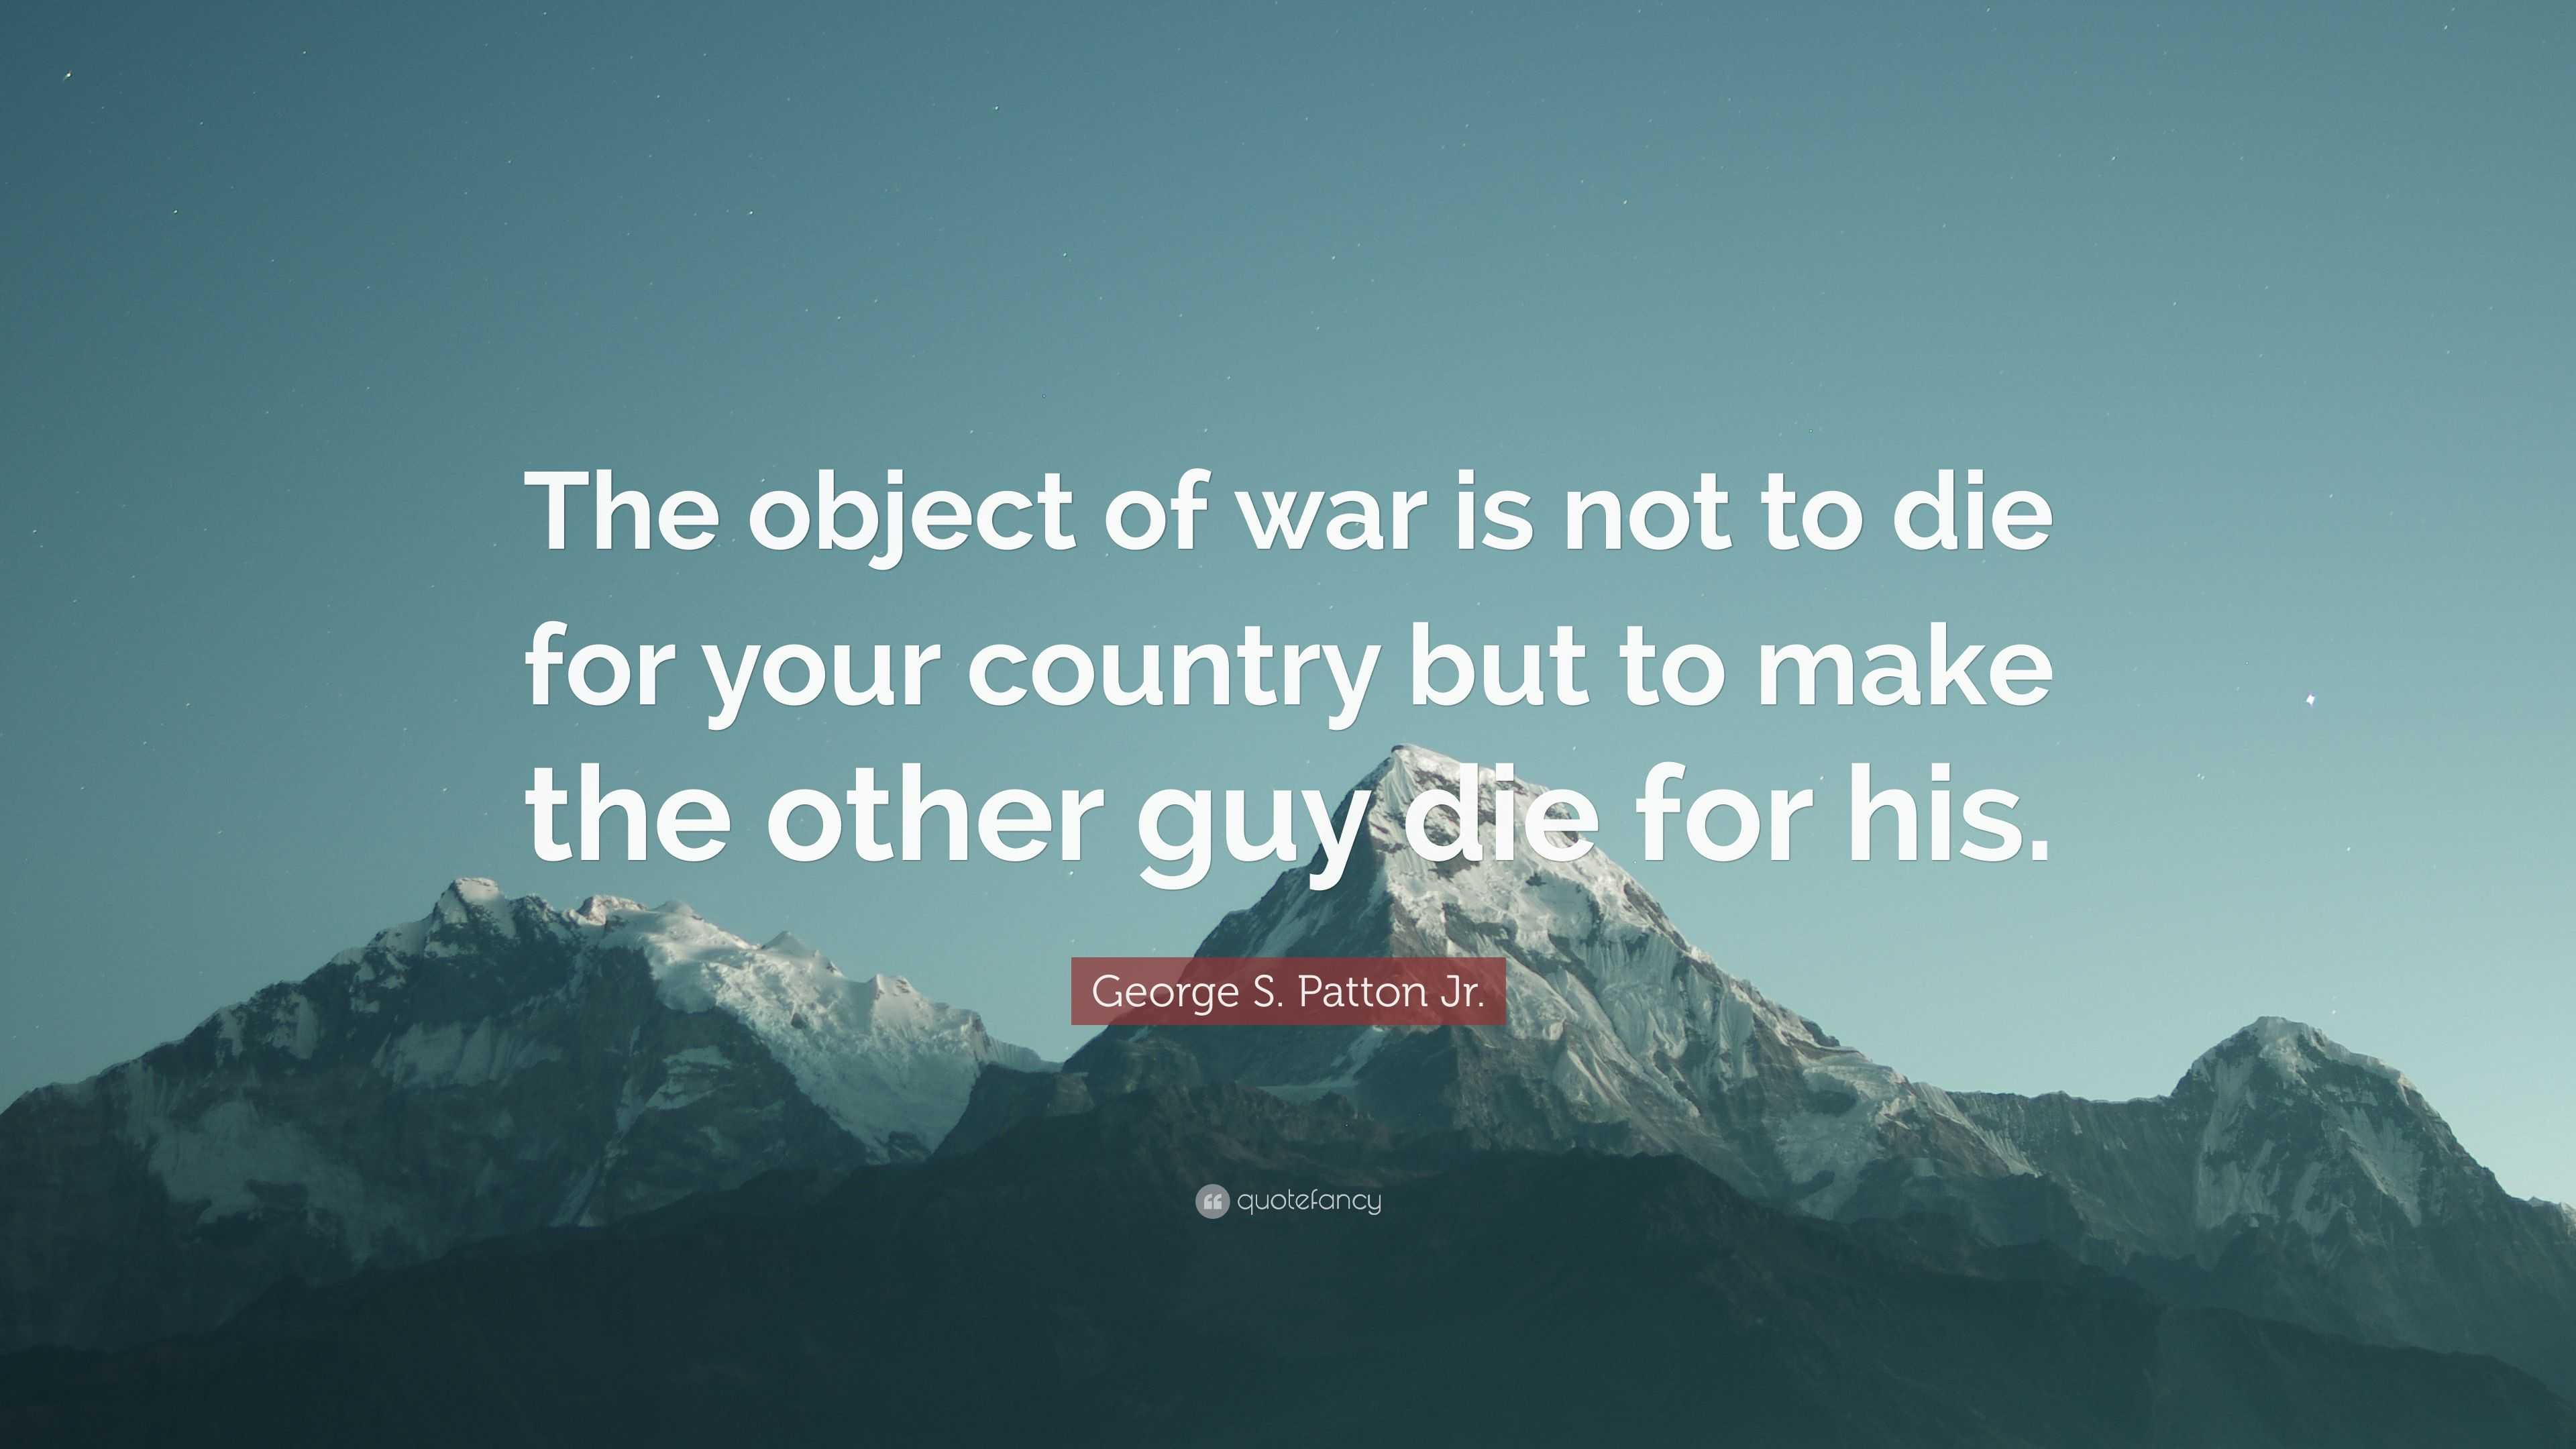 George S. Patton Jr. Quote: “The object of war is not to die for your ...